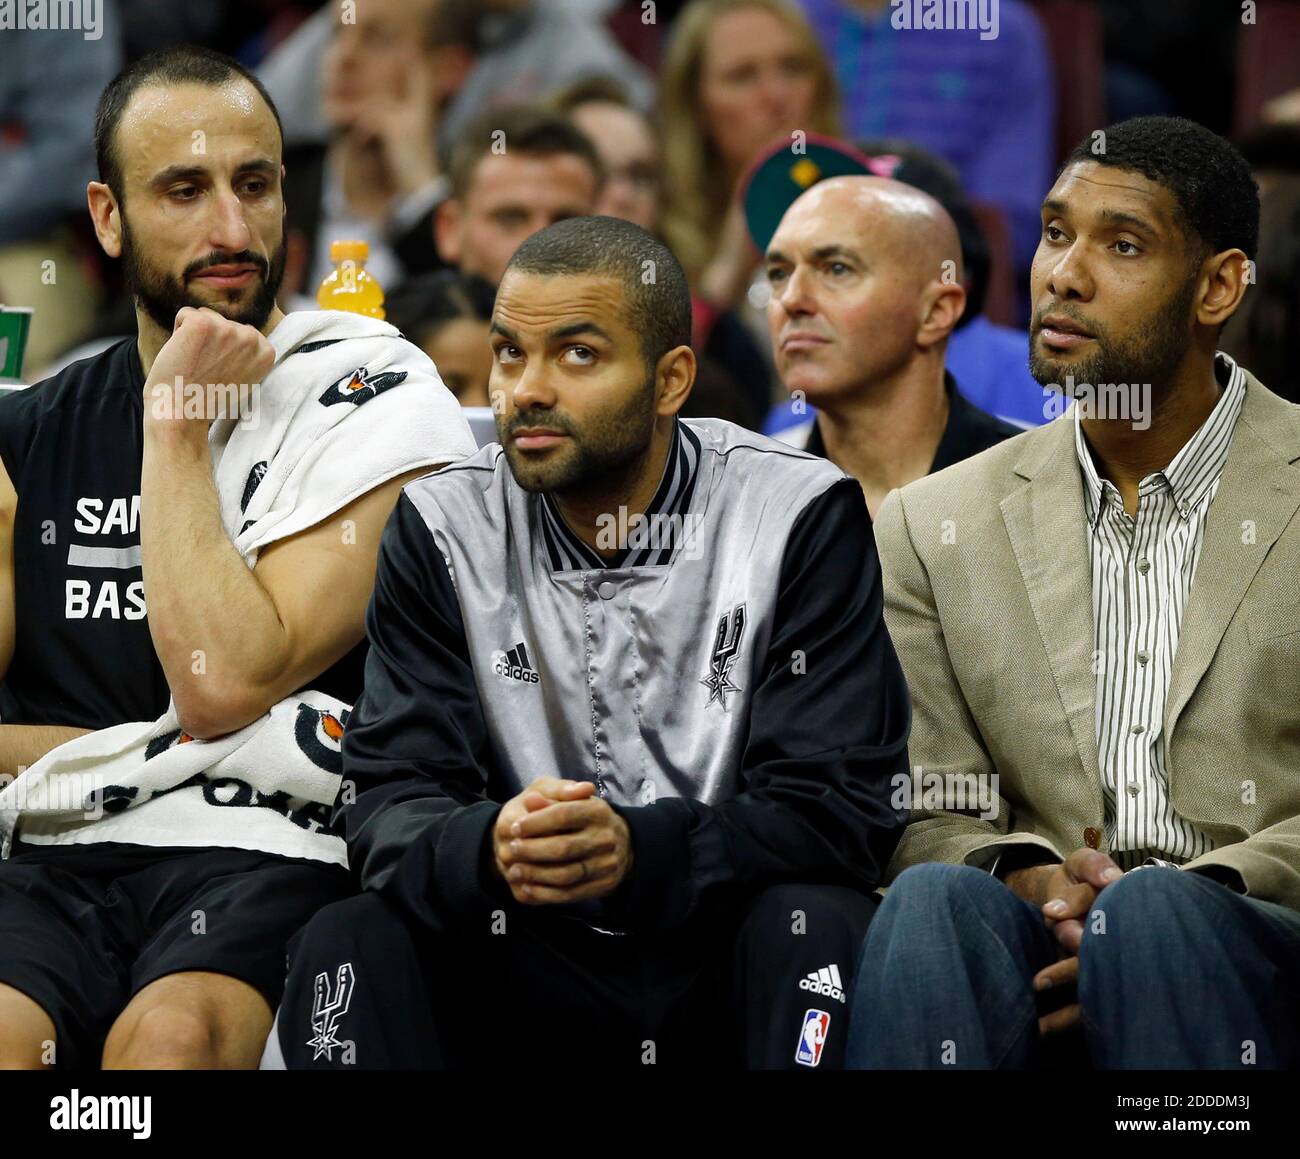 NO FILM, NO VIDEO, NO TV, NO DOCUMENTARY - San Antonio Spurs' Manu Ginobili, Tony Parker and Tim Duncan sit on the Spurs bench against the Philadelphia 76ers on Monday, Dec. 1, 2014, at Wells Fargo Center in Philadelphia. Parker and Duncan did not play during the first half. (Yong Kim/Philadelphia Inquirer/TNS) Stock Photo